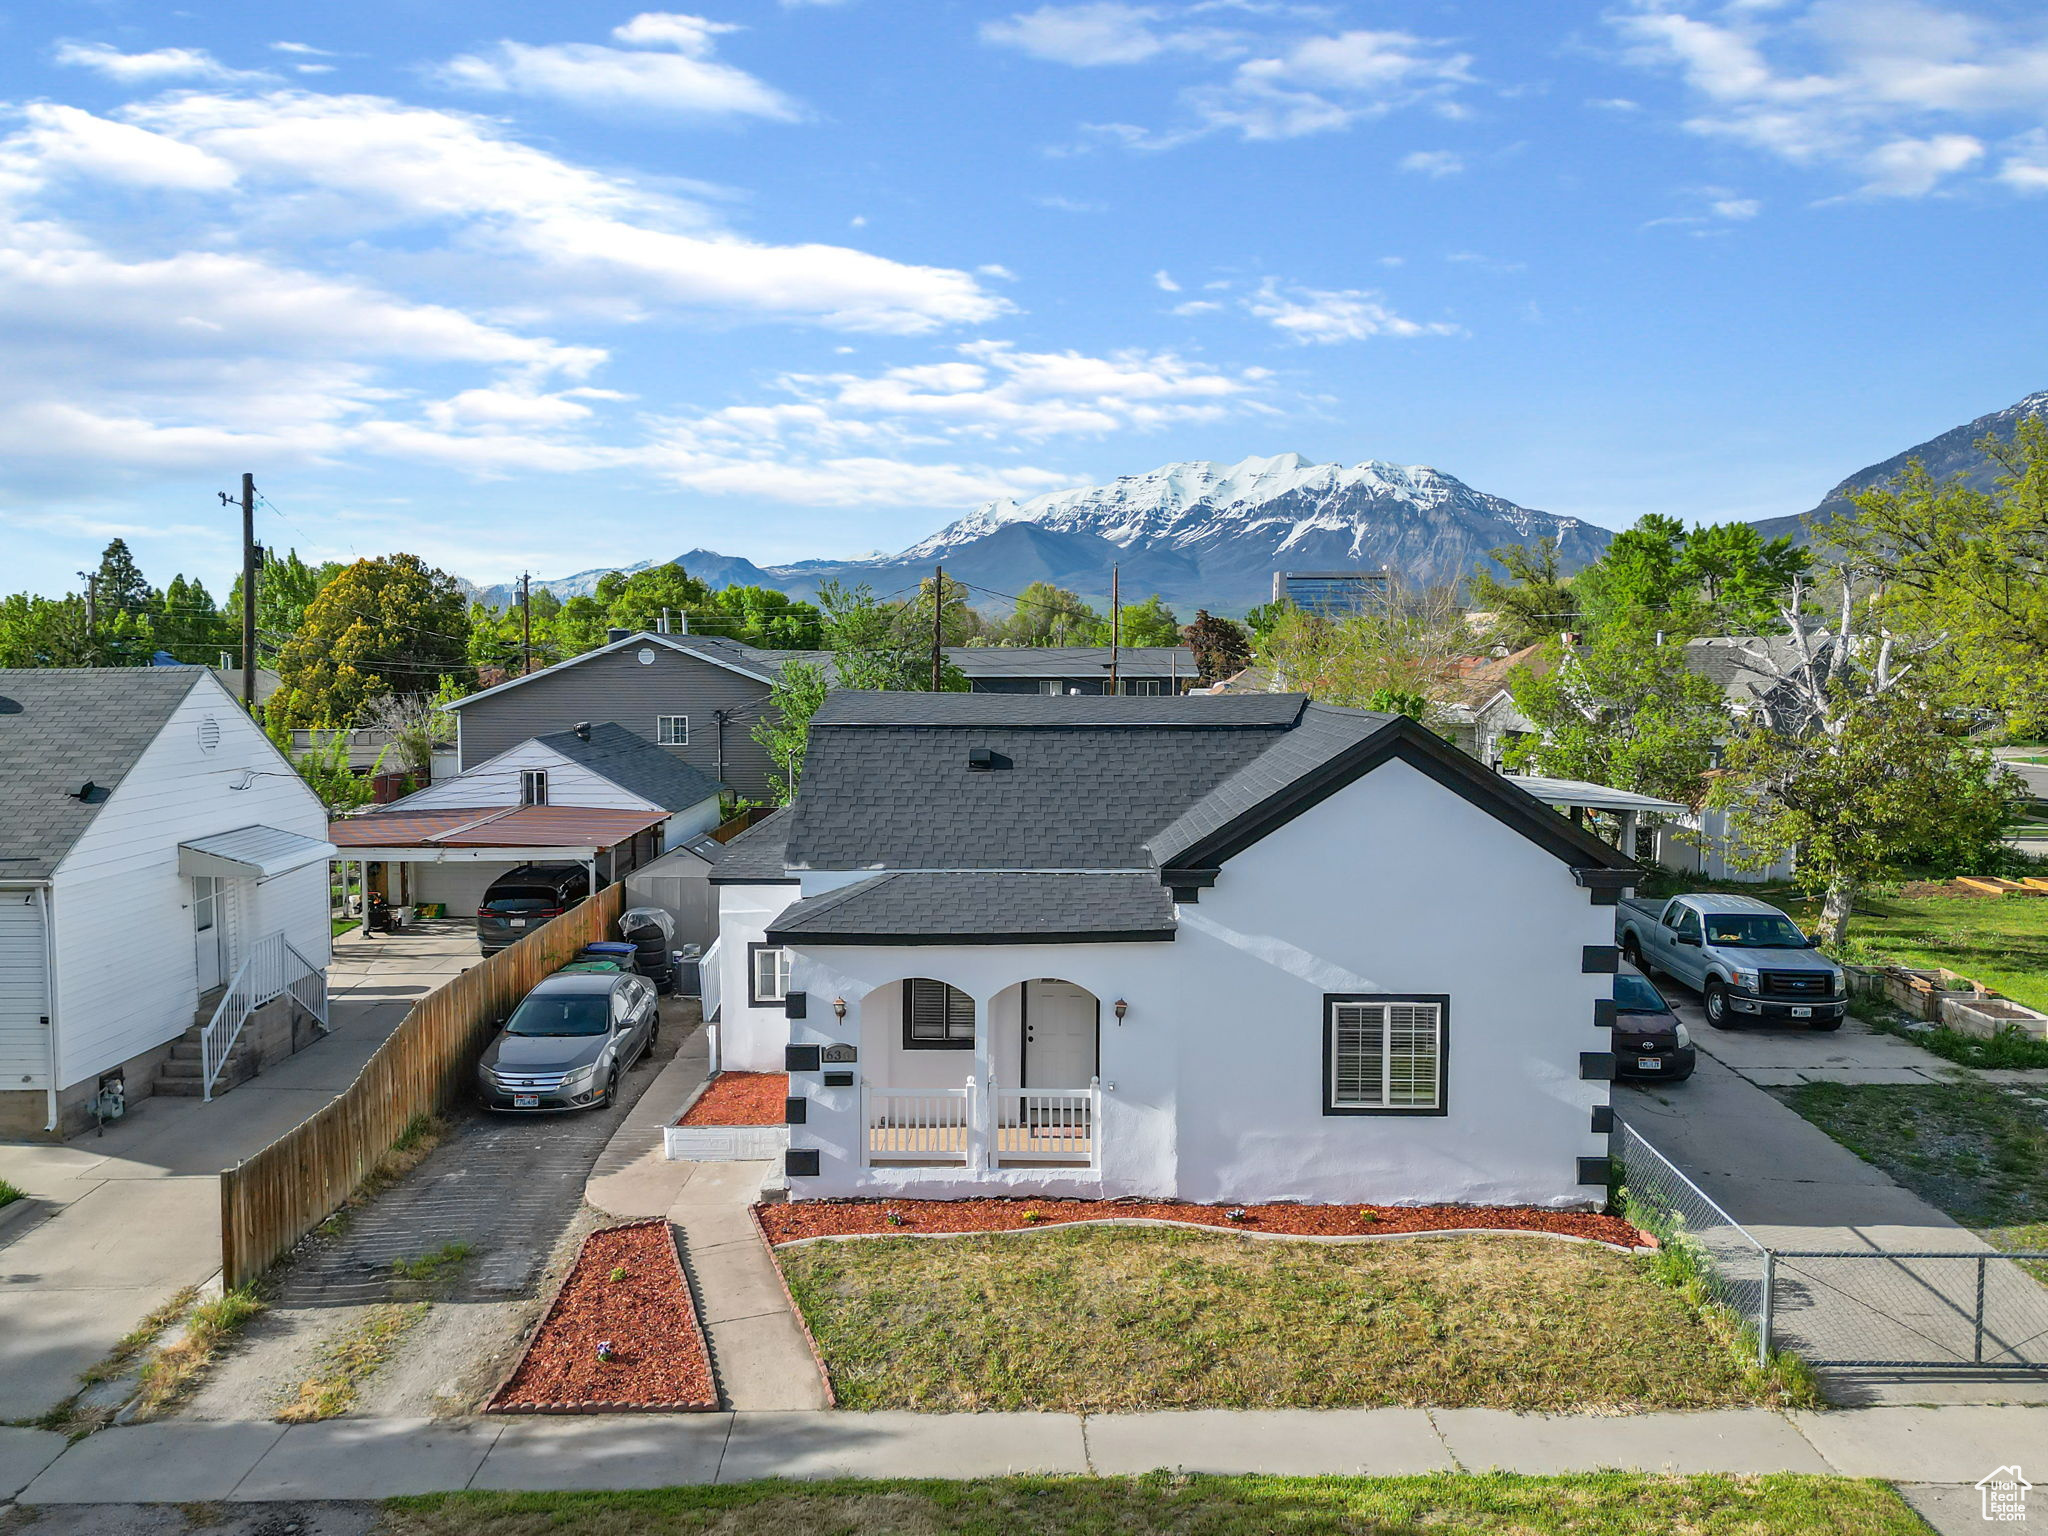 View of front of property featuring a mountain view and a carport